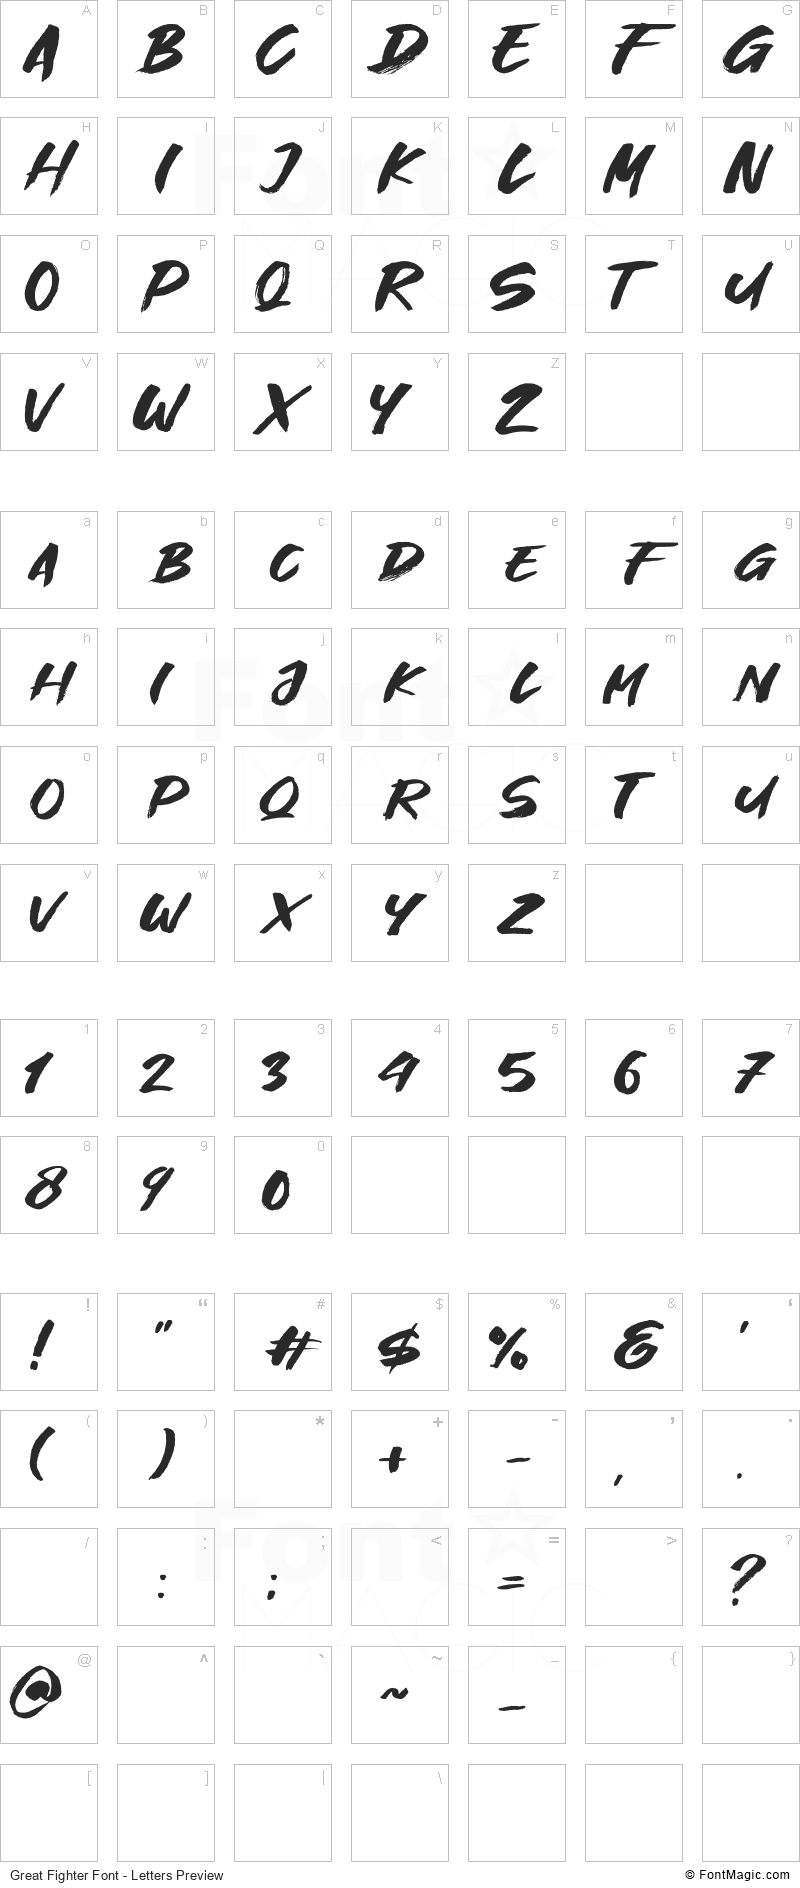 Great Fighter Font - All Latters Preview Chart